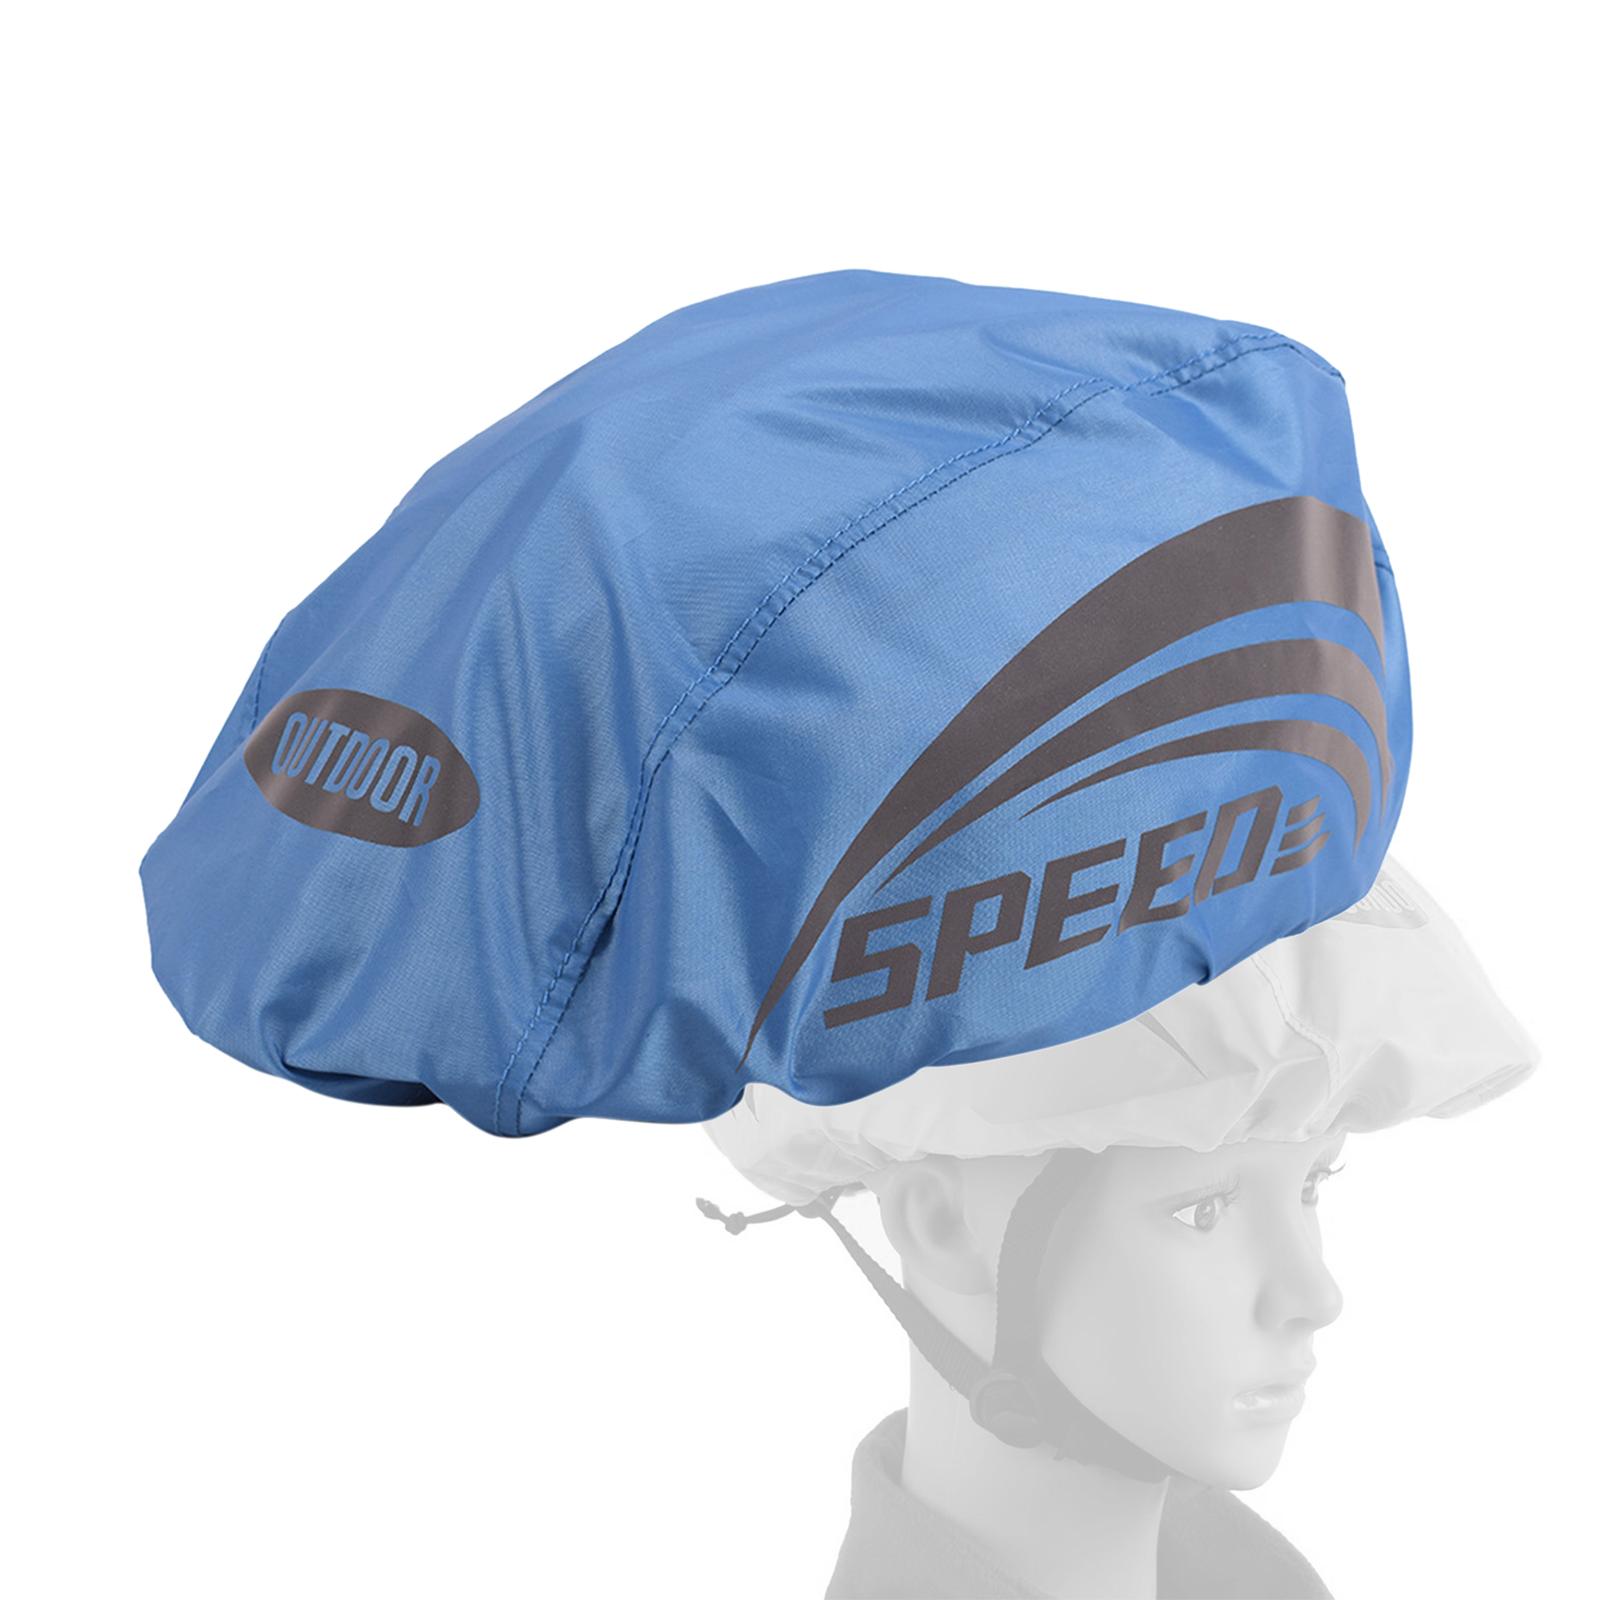 Waterproof Cycling Helmet Cover Reflective Strip Protect Blue Style 1